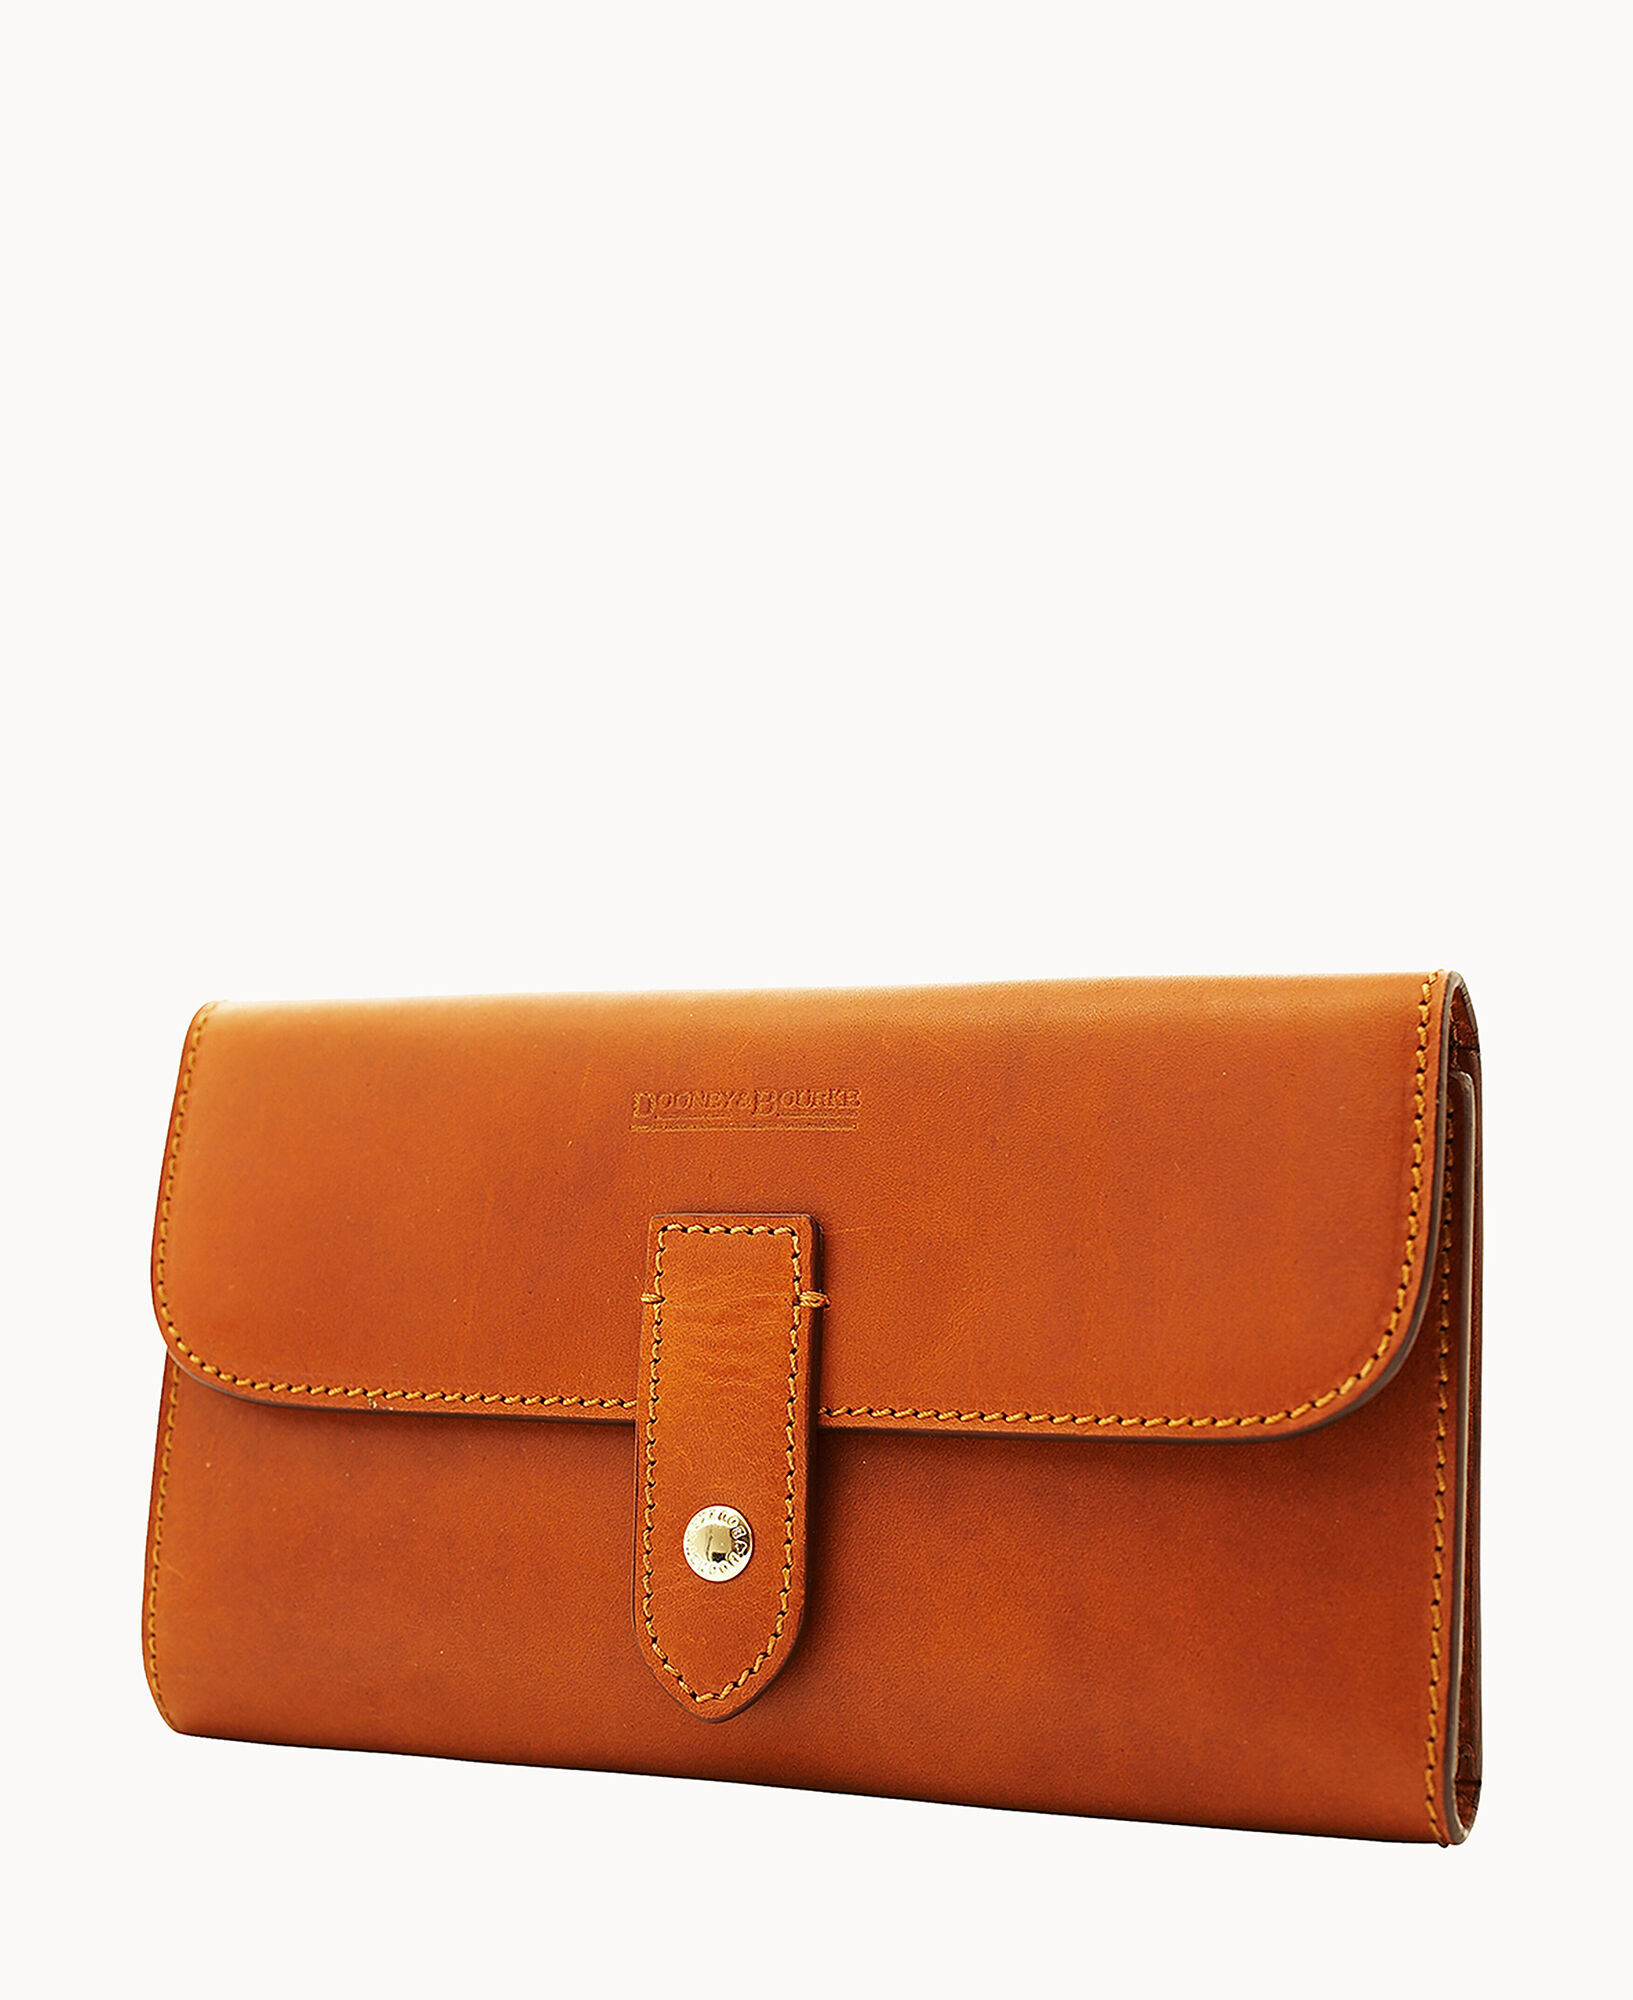 Dooney & Bourke Alto Removable Credit Card Wallet, Size: One Size